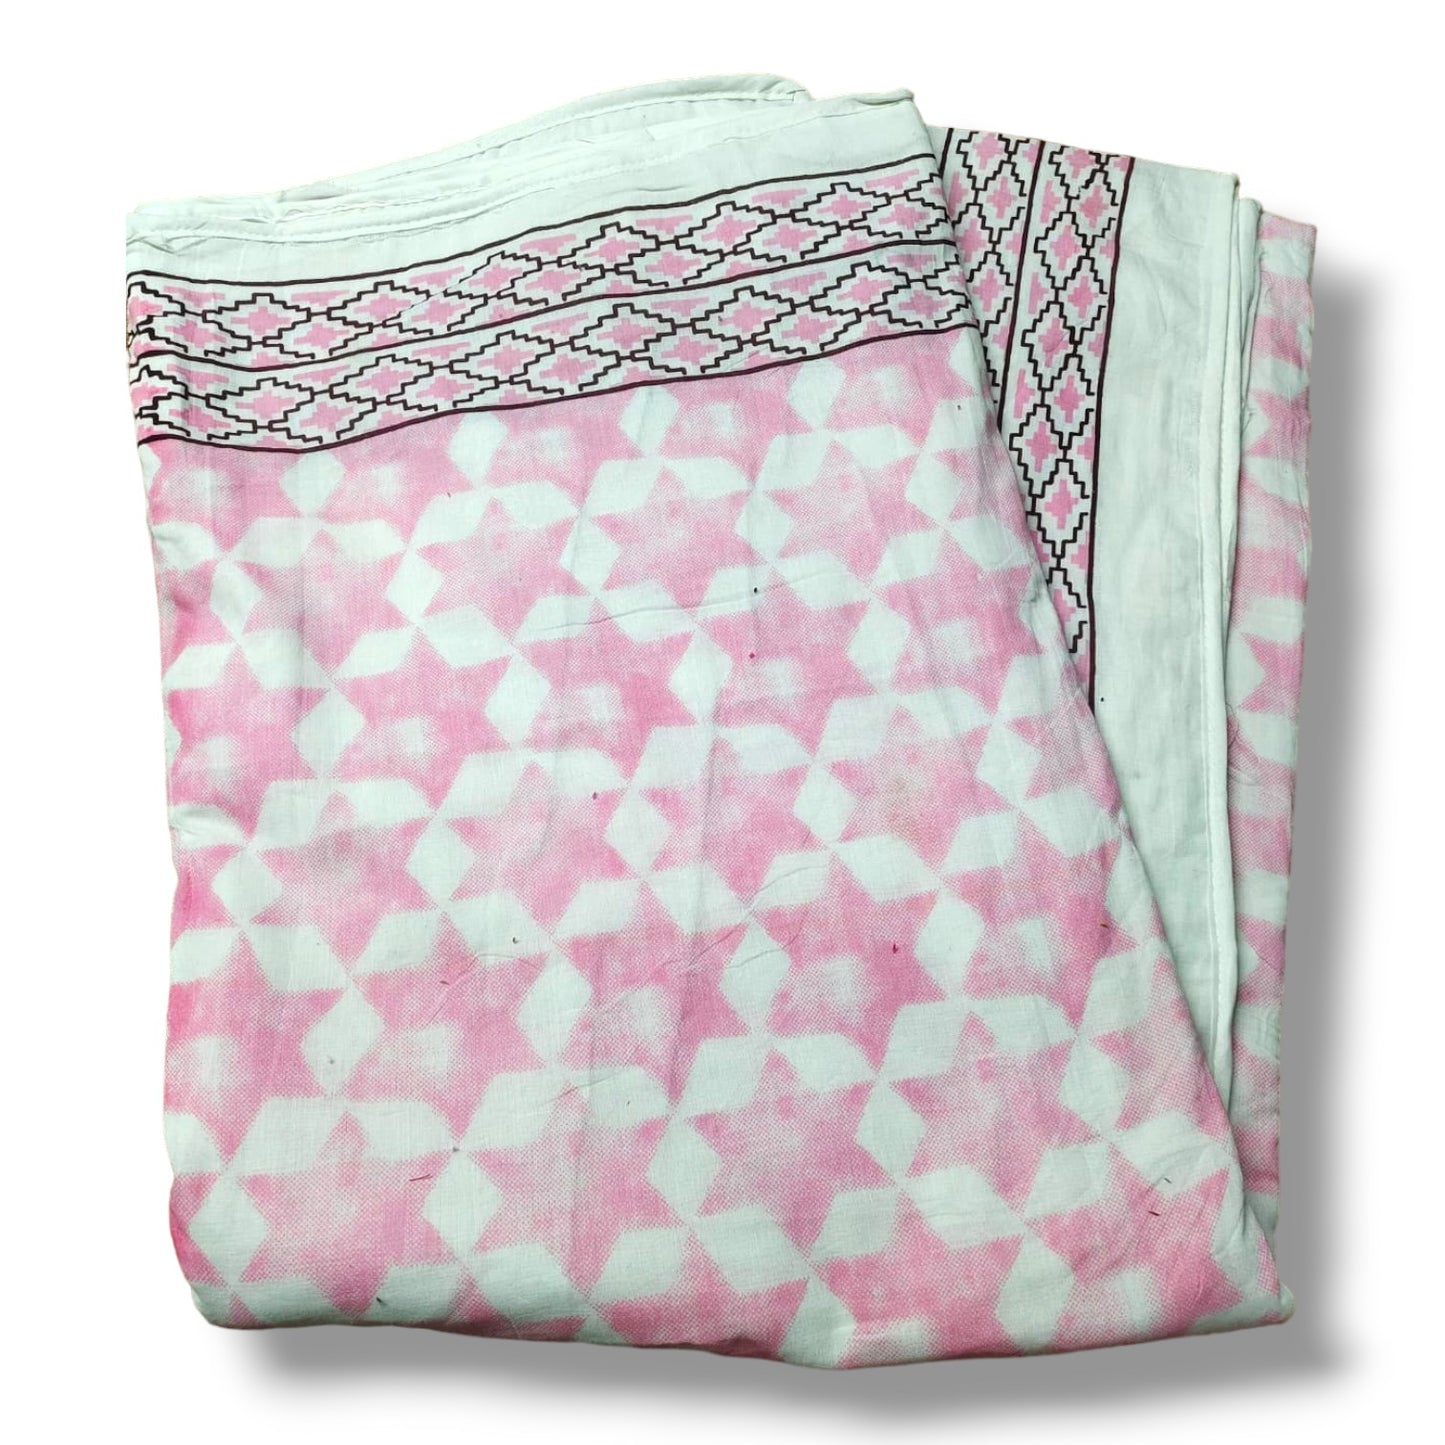 Malmal AC Quilt/Dohar-Starry pink -Single Bed